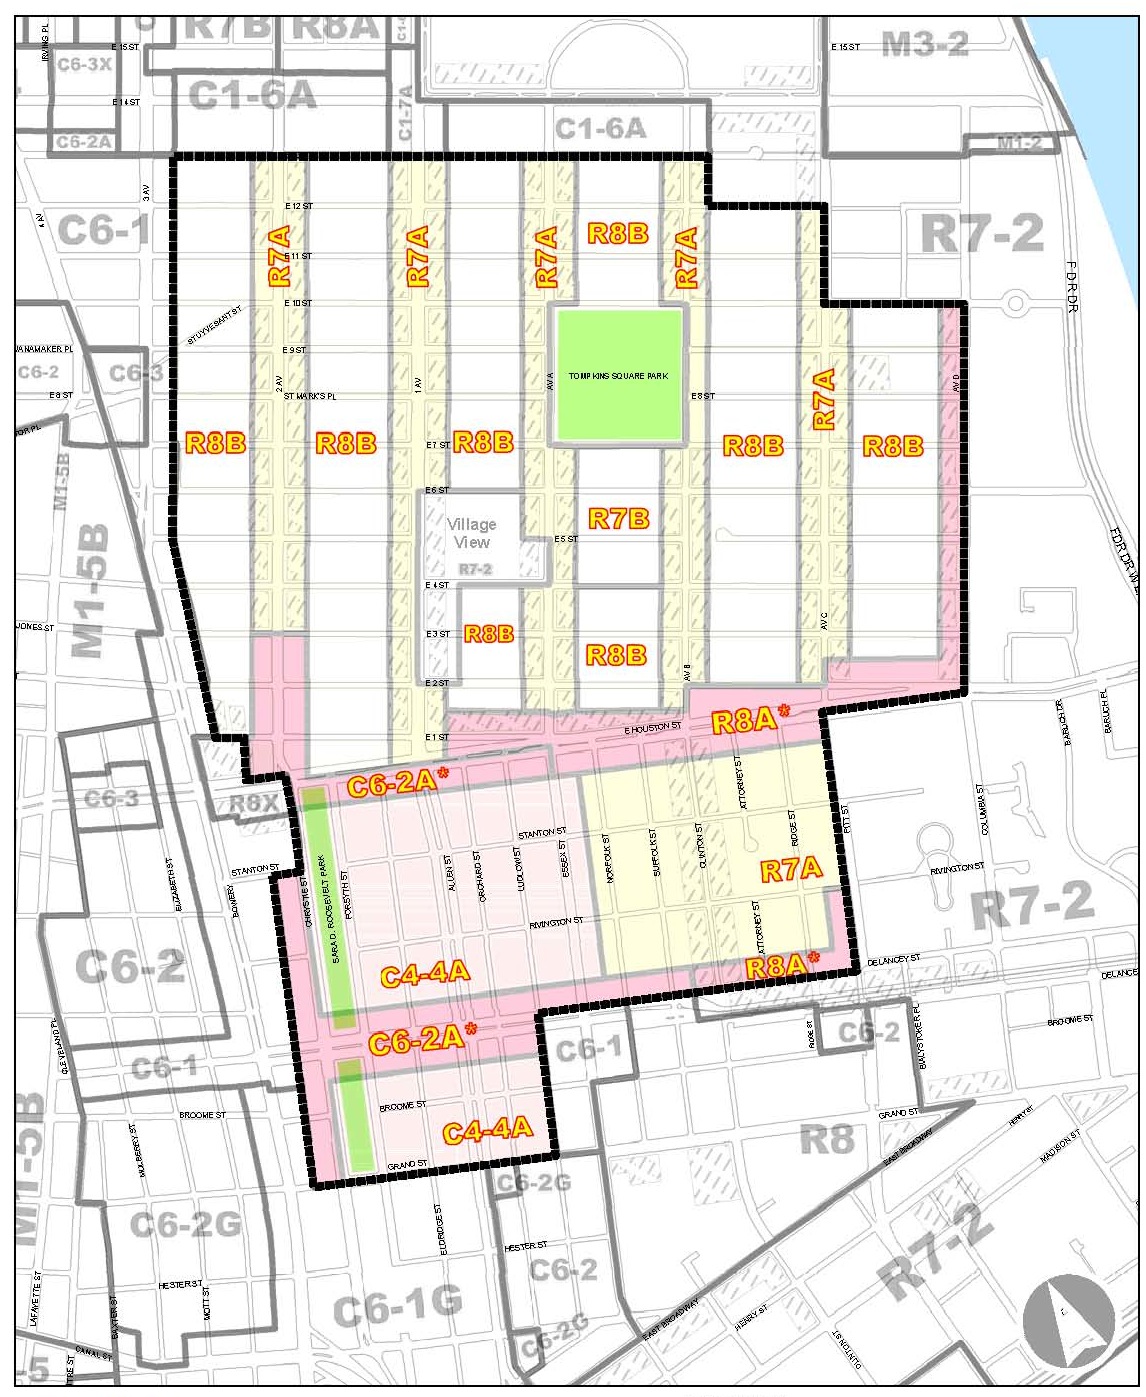 All of this area within the black lines, from E. 13th St. down to Grand St. and between Third Ave. / Bowery and Avenue D, is a contextual zone due to the 2008 East Village / Lower East Side rezoning. This whole area would see the current height caps raised under the administration's plan. 